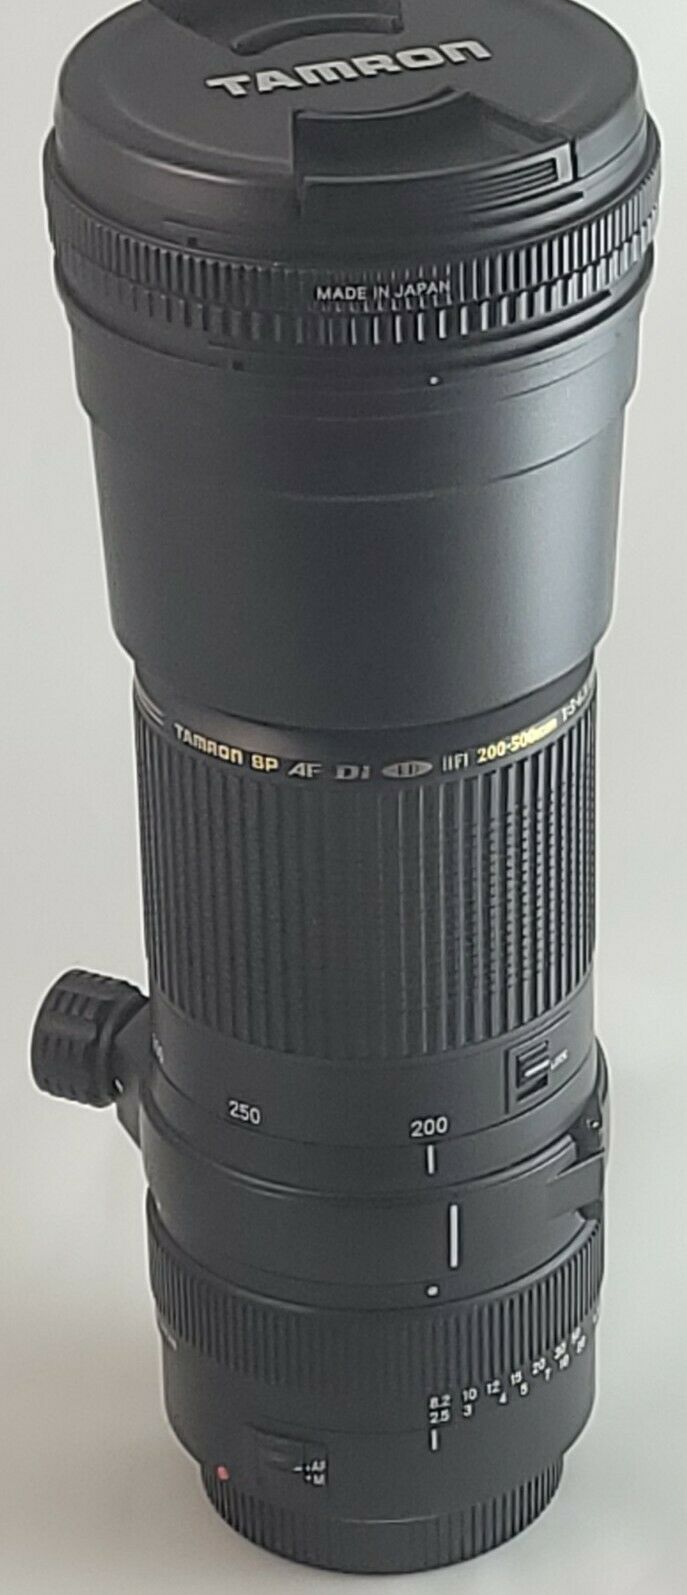 Tamron 200-500mm f/5-6.3 SP AF Di LD (IF) Lens for Nikon - Used